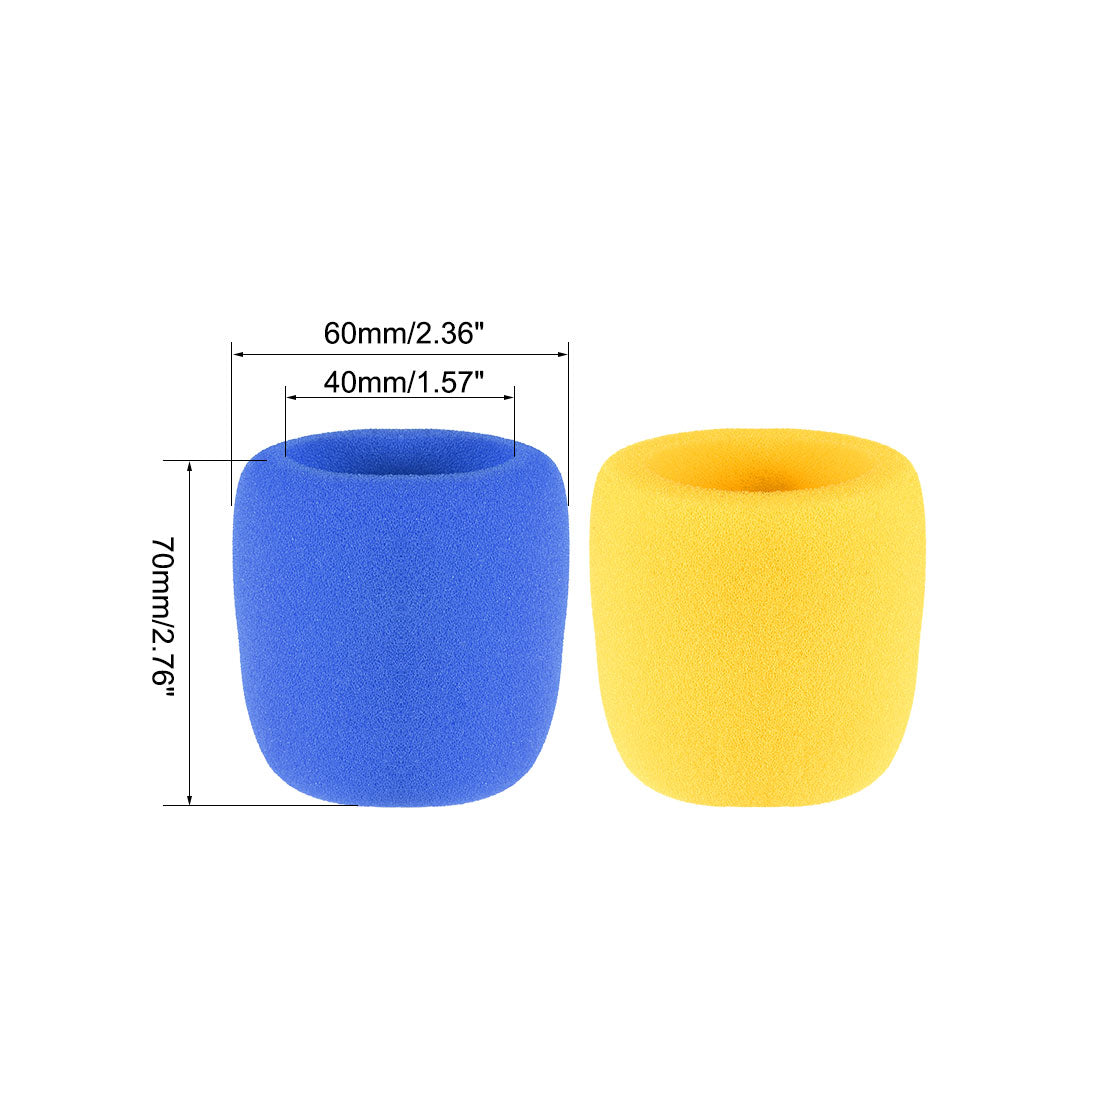 uxcell Uxcell 2PCS Thicken Sponge Foam Mic Cover Handheld Microphone Windscreen Blue Yellow for KTV